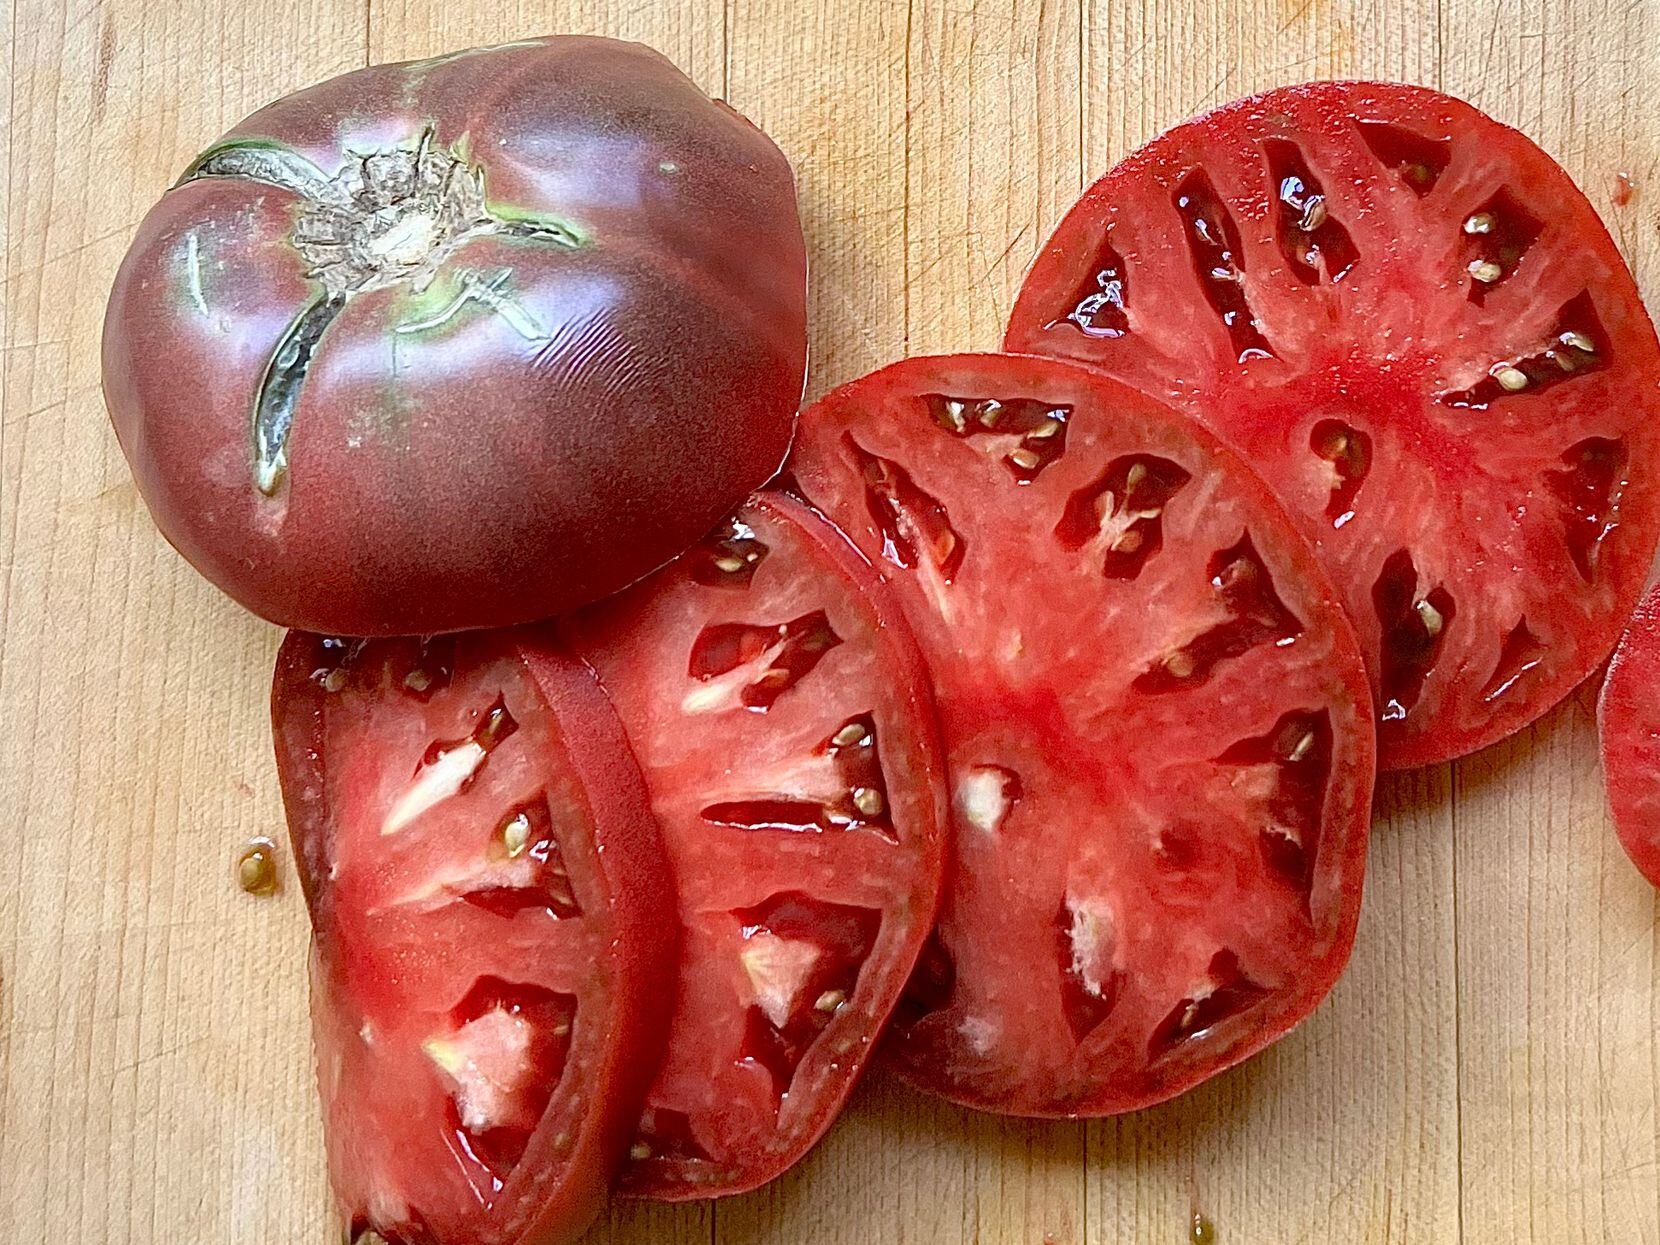 Purple-red tomatoes are sliced open.